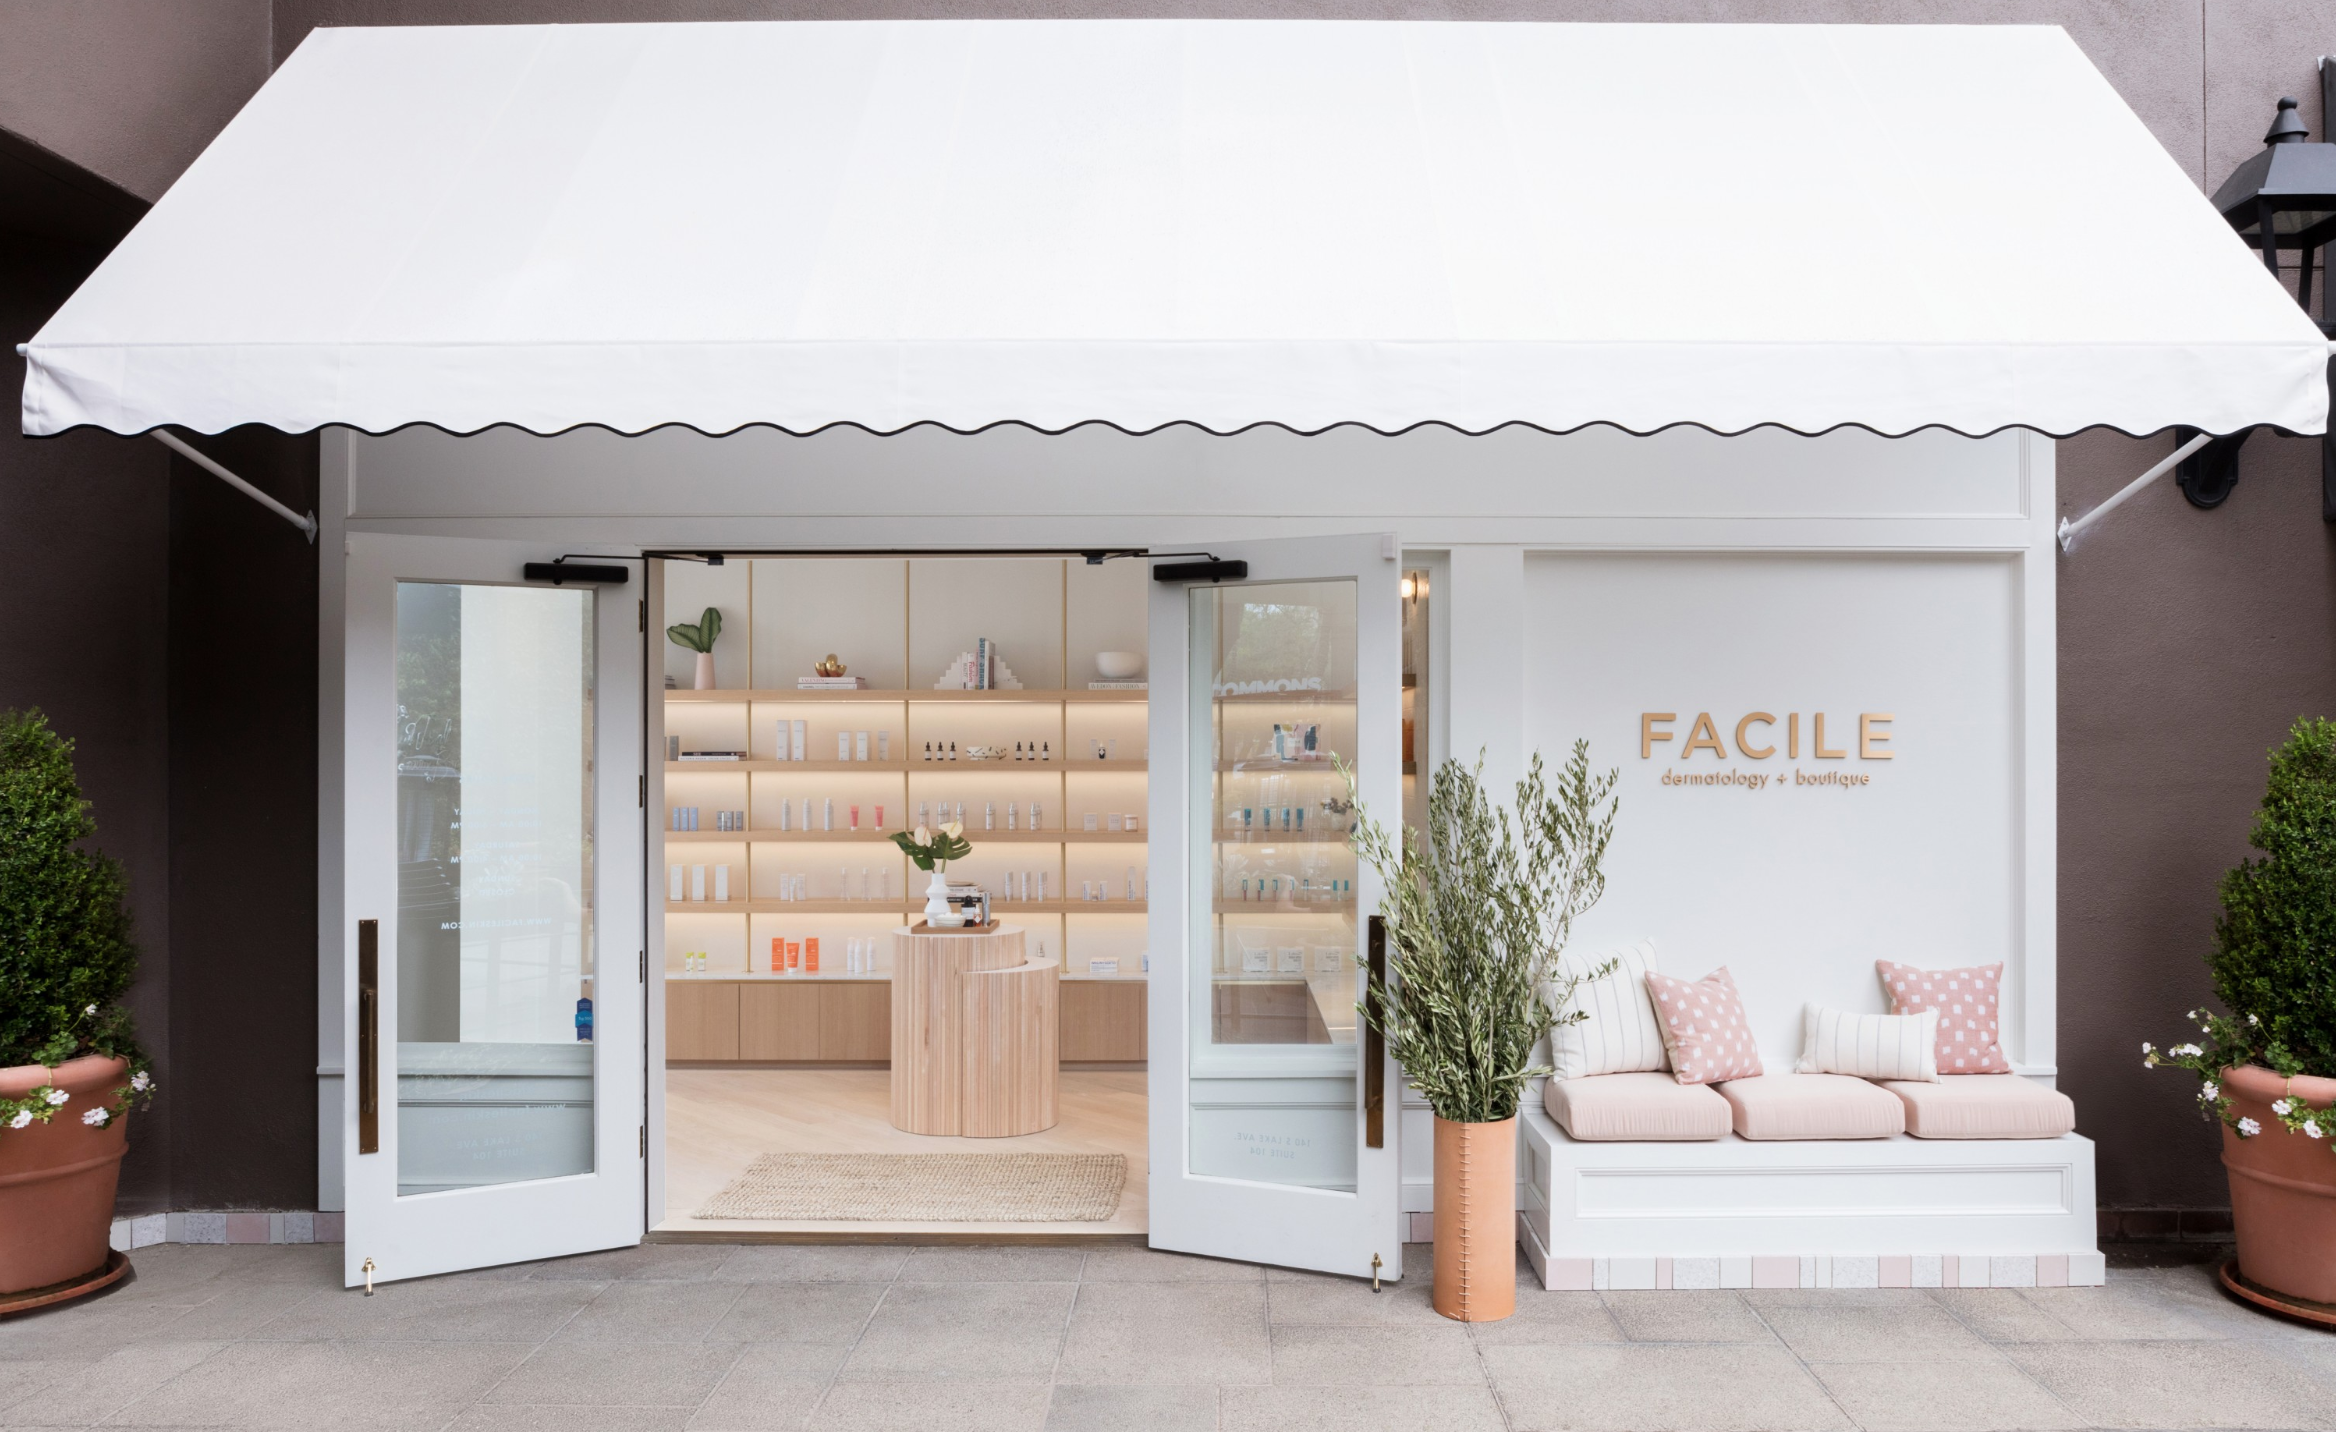  Facile, designed by Studio Life.Style. See inside,  here . Photographer  Stephen Busken  